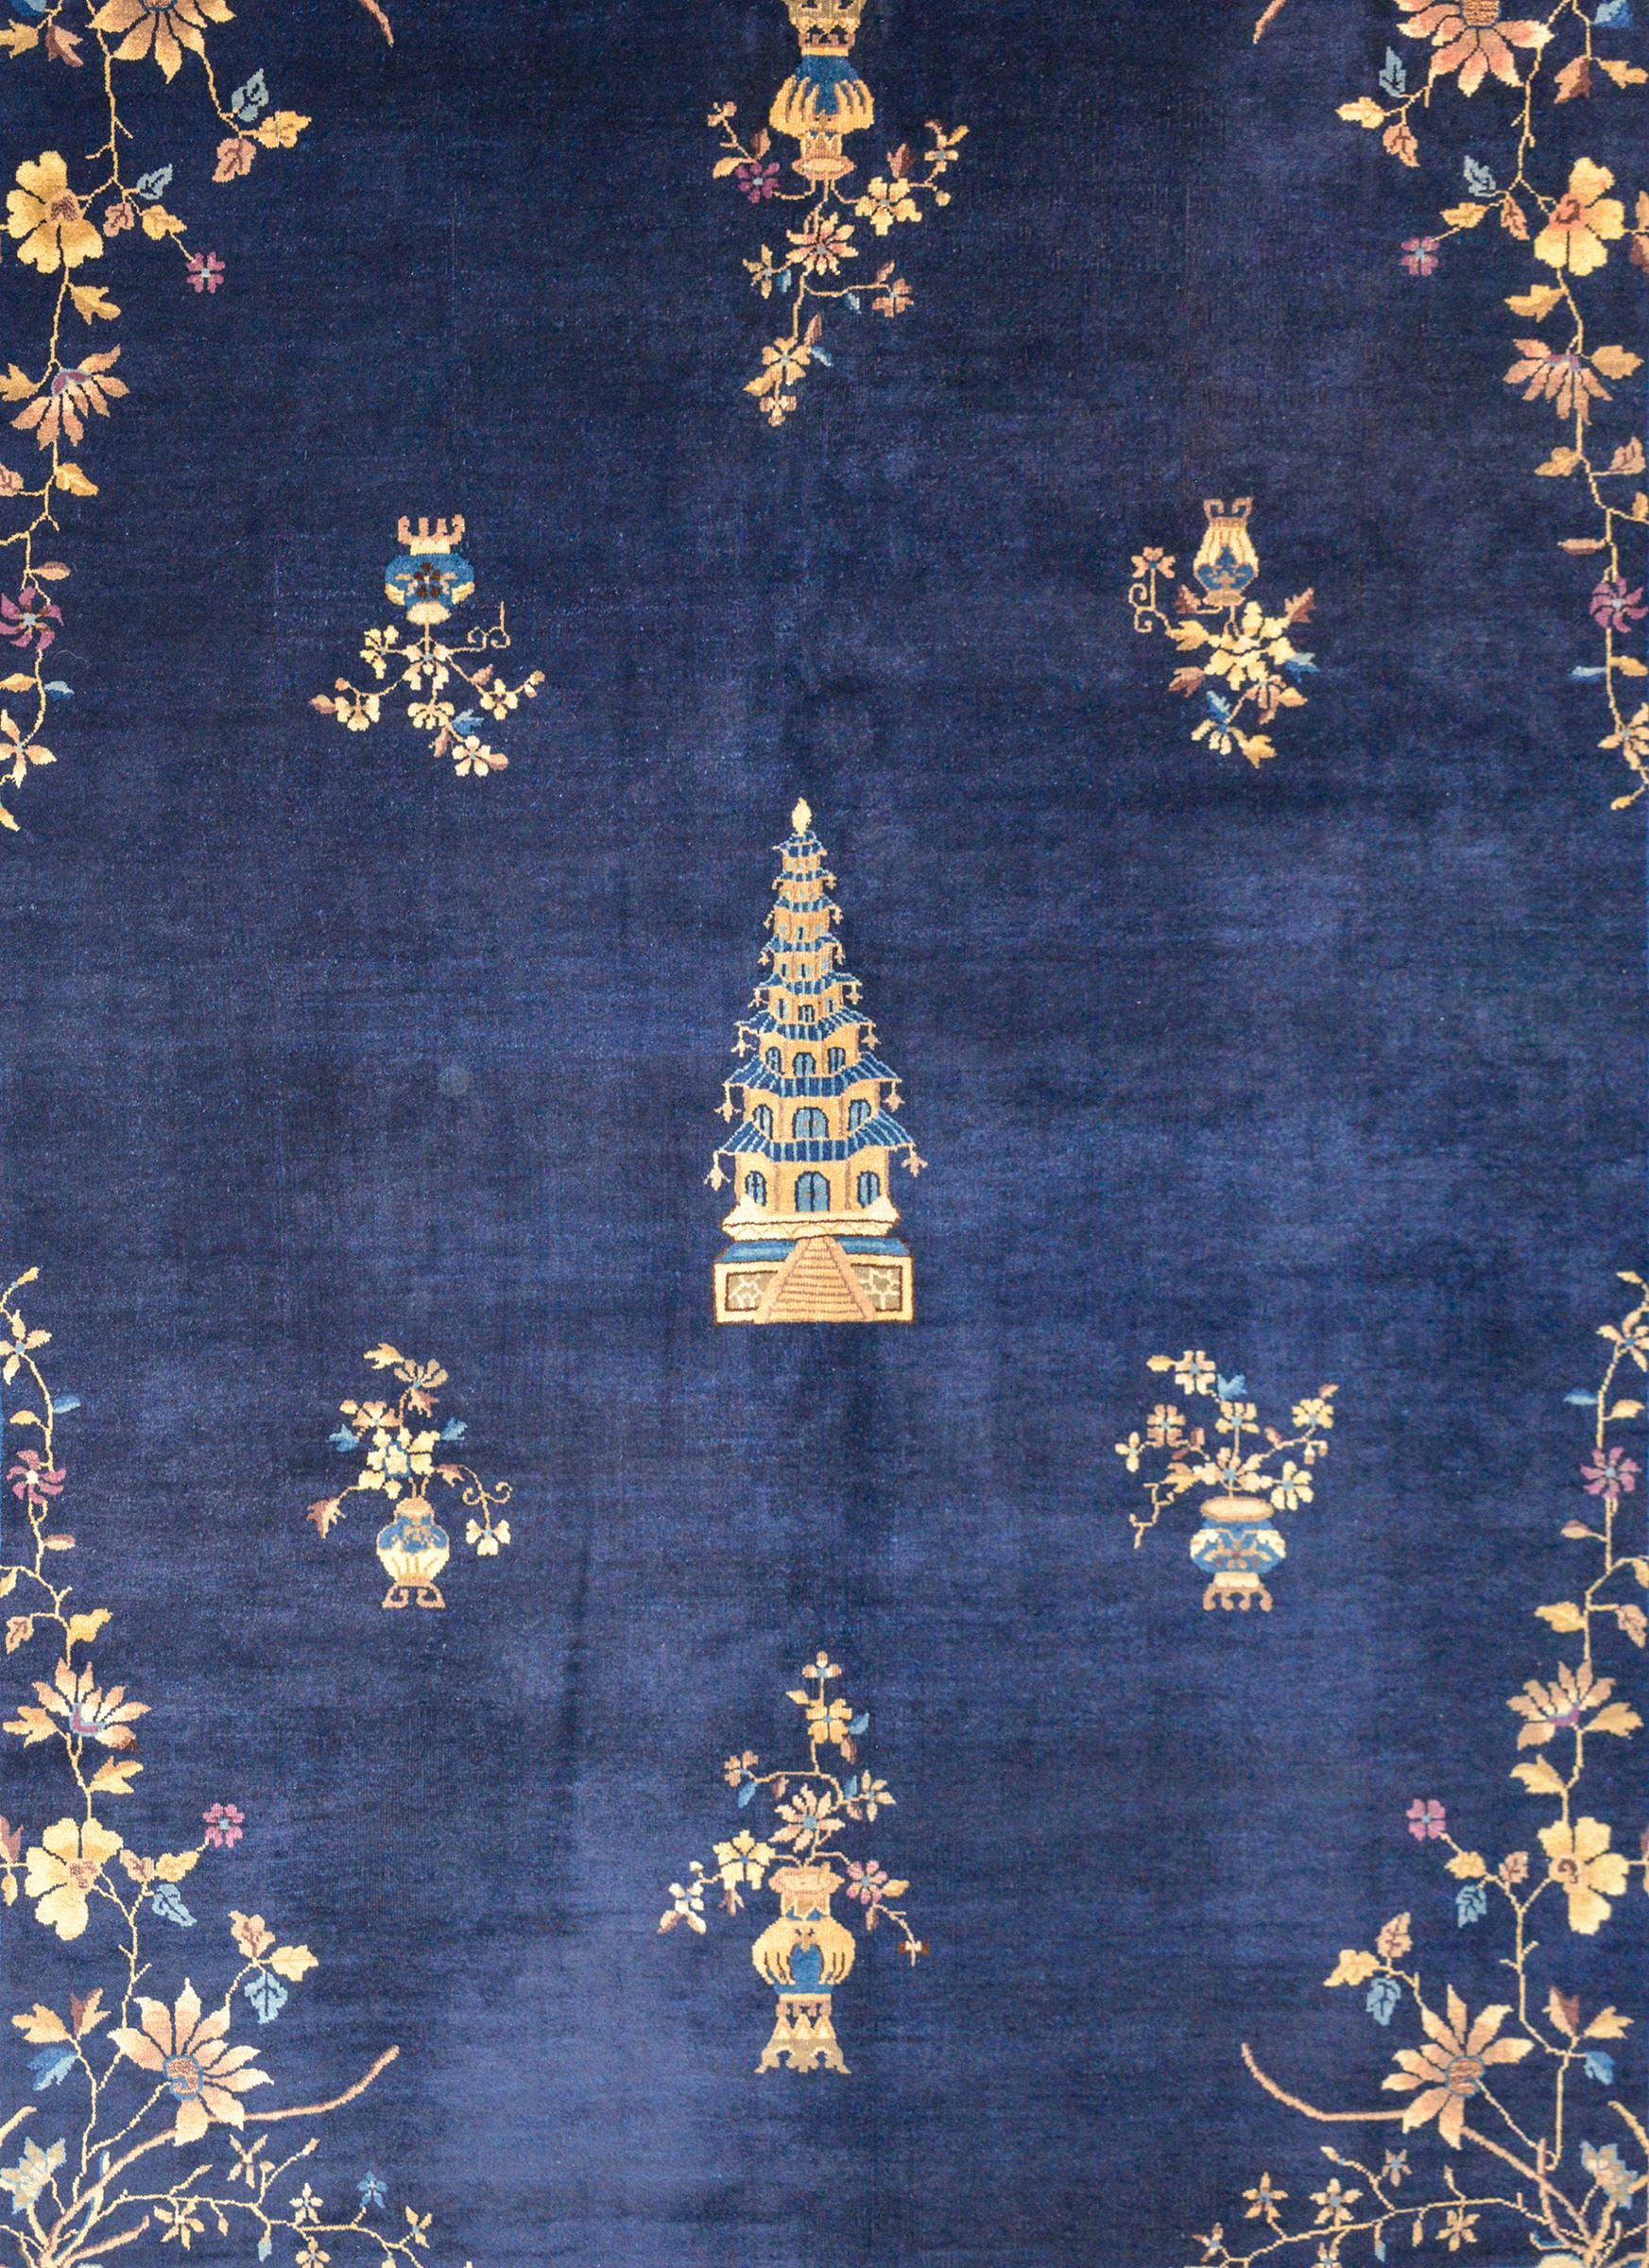 An outstanding early 20th century Chinese Art Deco rug with a large pagoda in the center amidst a field of potted auspicious flowers woven in cream, brown, light and dark indigo, against a dark indigo field and surrounded by a wide lighter indigo